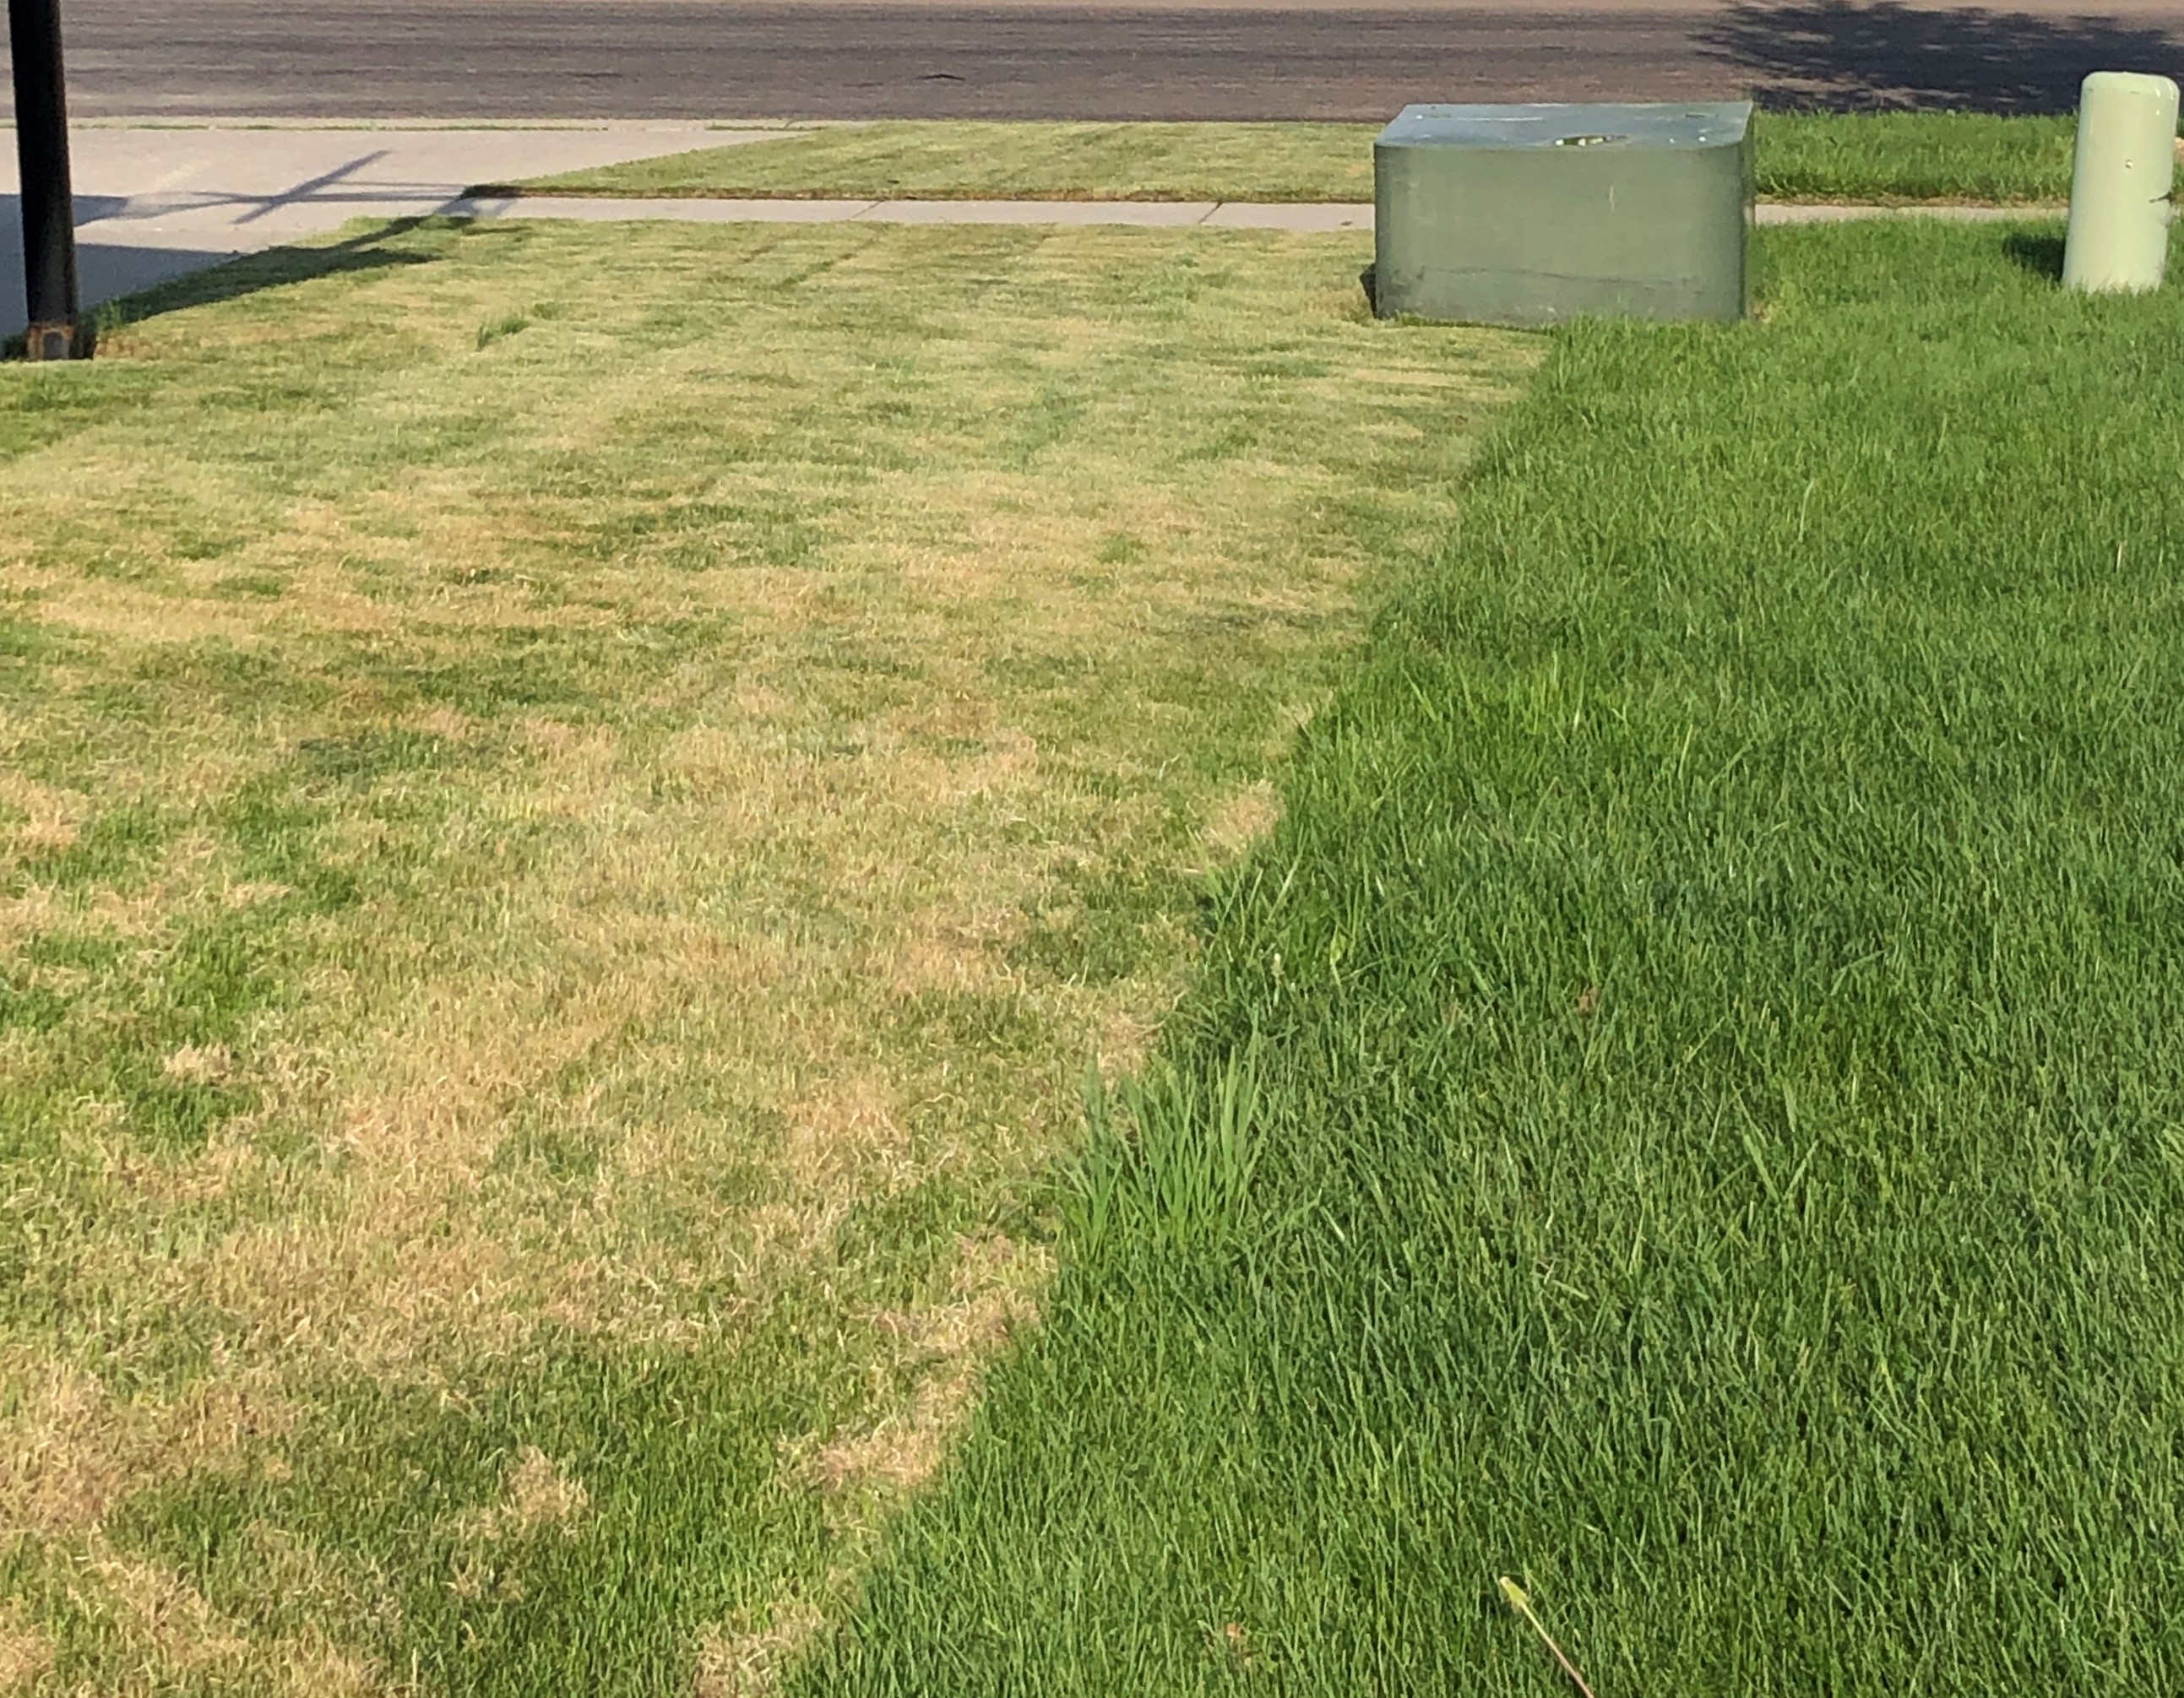 Mowing the lawn too short is stressful for the turfgrass and makes the lawn less drought-tolerant. (NDSU photo)